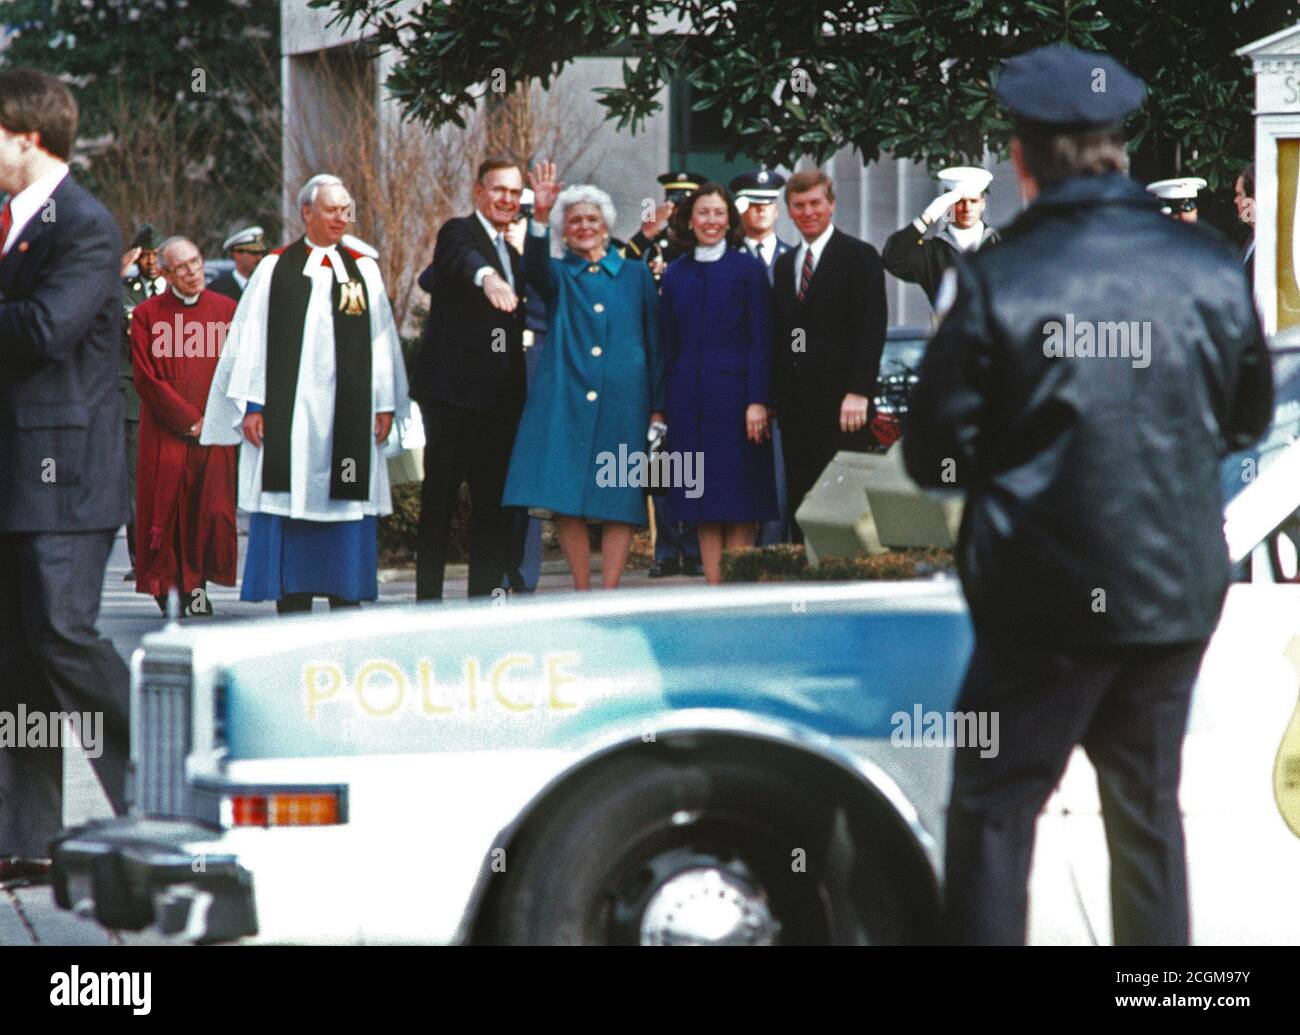 Members of the clergy stand beside President-elect George H.W. Bush, Barbara Bush, Marilyn Quayle and Vice President-elect J. Danforth Quayle following a Mass at St. John's Episcopal Church. Stock Photo